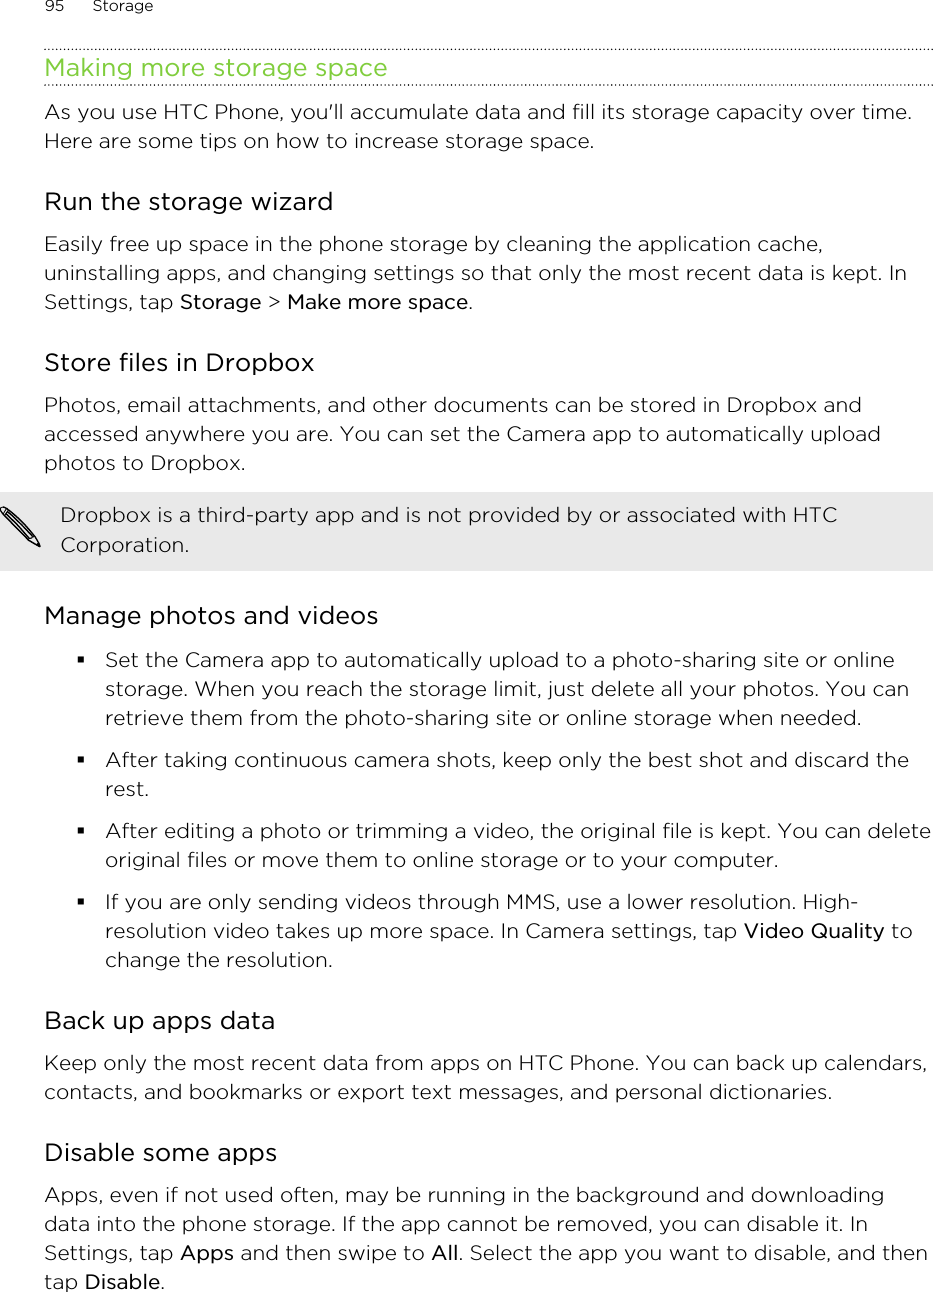 Making more storage spaceAs you use HTC Phone, you&apos;ll accumulate data and fill its storage capacity over time.Here are some tips on how to increase storage space.Run the storage wizardEasily free up space in the phone storage by cleaning the application cache,uninstalling apps, and changing settings so that only the most recent data is kept. InSettings, tap Storage &gt; Make more space.Store files in DropboxPhotos, email attachments, and other documents can be stored in Dropbox andaccessed anywhere you are. You can set the Camera app to automatically uploadphotos to Dropbox.Dropbox is a third-party app and is not provided by or associated with HTCCorporation.Manage photos and videos§Set the Camera app to automatically upload to a photo-sharing site or onlinestorage. When you reach the storage limit, just delete all your photos. You canretrieve them from the photo-sharing site or online storage when needed.§After taking continuous camera shots, keep only the best shot and discard therest.§After editing a photo or trimming a video, the original file is kept. You can deleteoriginal files or move them to online storage or to your computer.§If you are only sending videos through MMS, use a lower resolution. High-resolution video takes up more space. In Camera settings, tap Video Quality tochange the resolution.Back up apps dataKeep only the most recent data from apps on HTC Phone. You can back up calendars,contacts, and bookmarks or export text messages, and personal dictionaries.Disable some appsApps, even if not used often, may be running in the background and downloadingdata into the phone storage. If the app cannot be removed, you can disable it. InSettings, tap Apps and then swipe to All. Select the app you want to disable, and thentap Disable.95 StorageHTC Confidential for Certification HTC Confidential for Certification